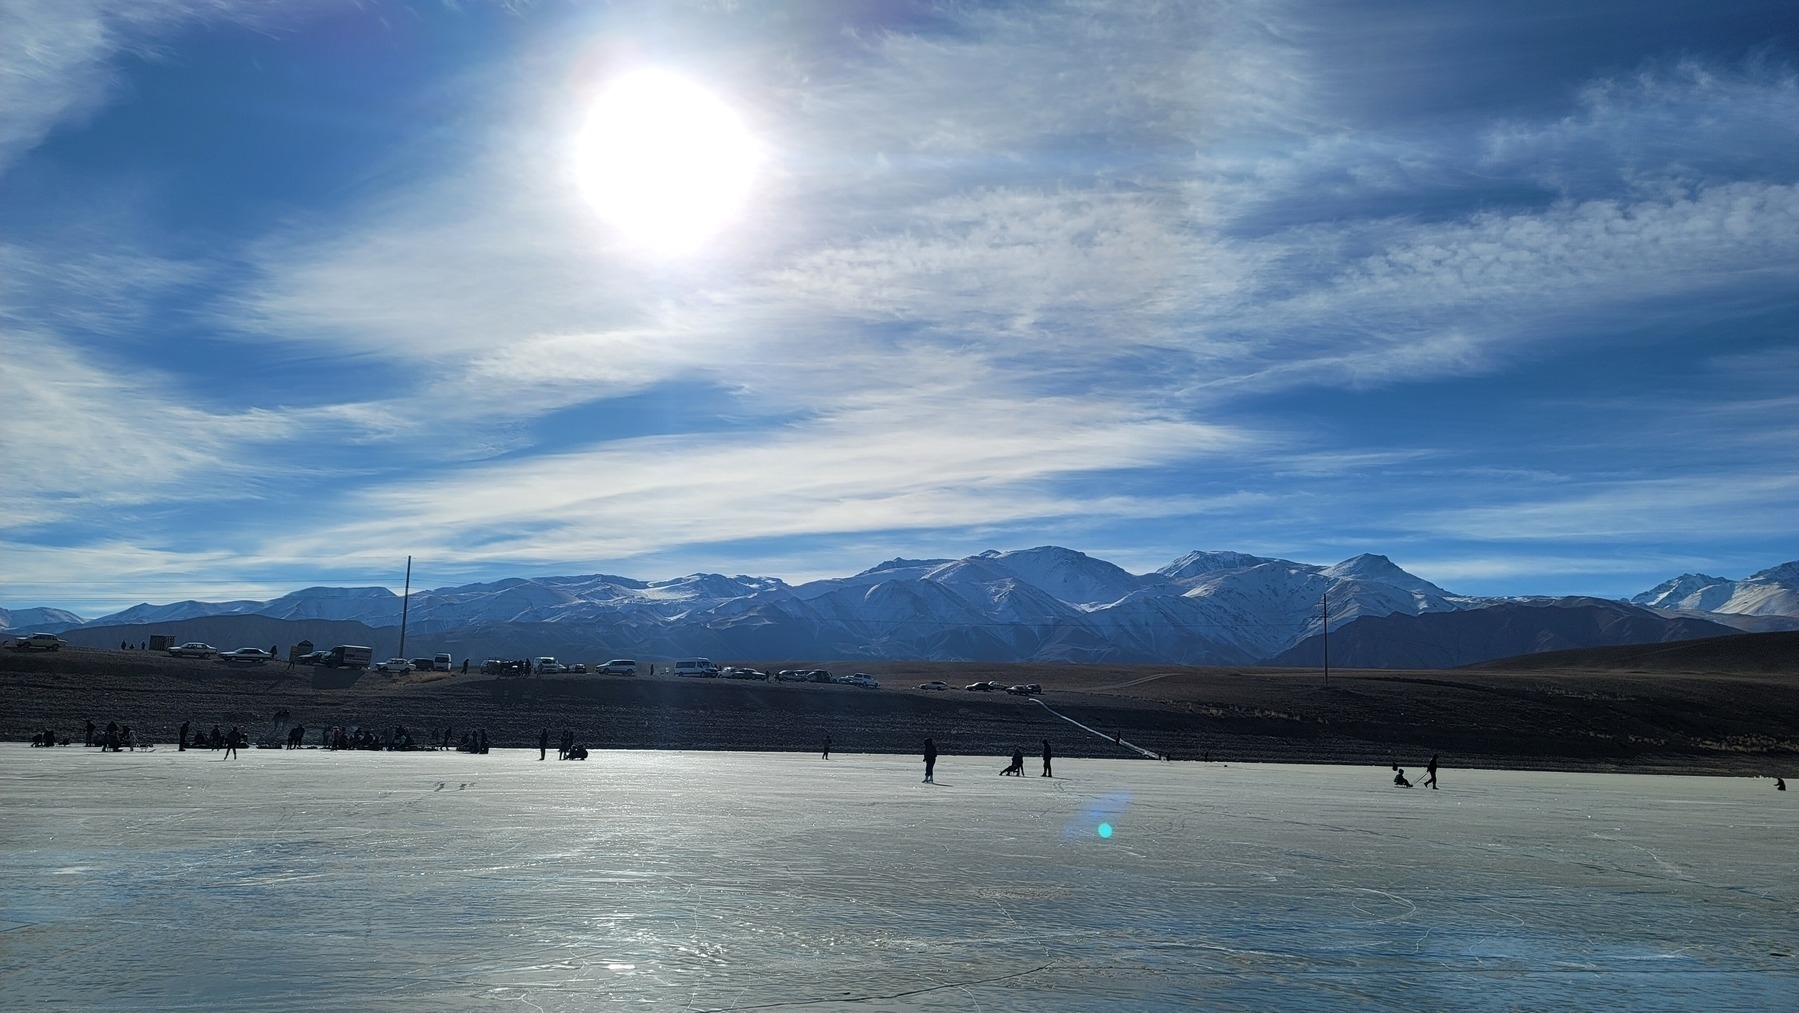 frozen lake with some ice skaters, a brown hill above with parked cars, and snow-capped mountains in the distance